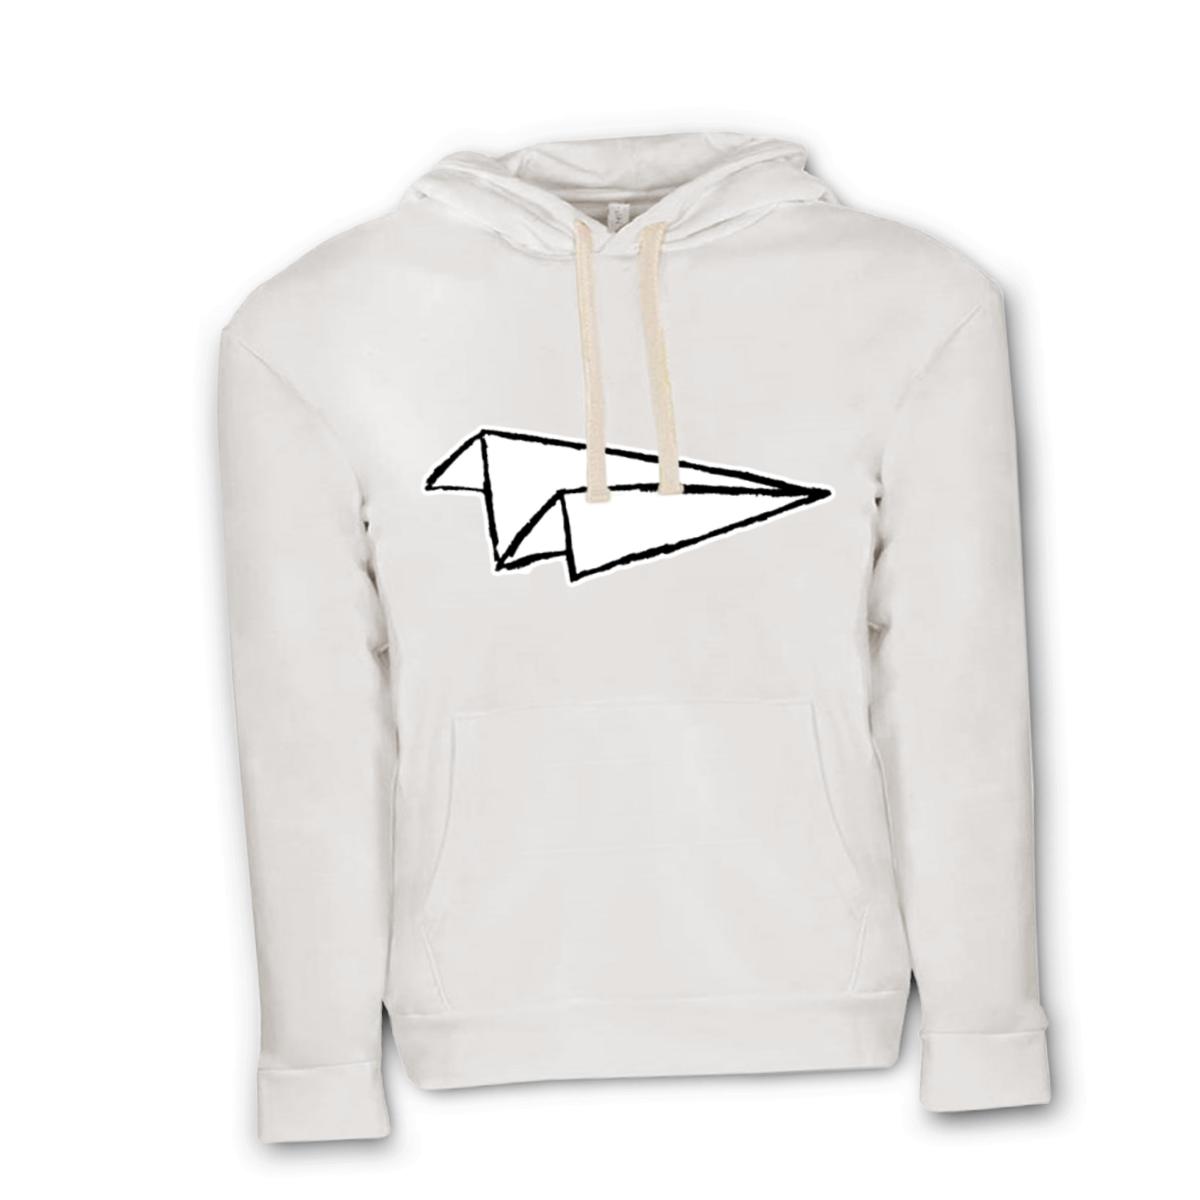 Airplane Sketch Unisex Pullover Hoodie Extra Large white